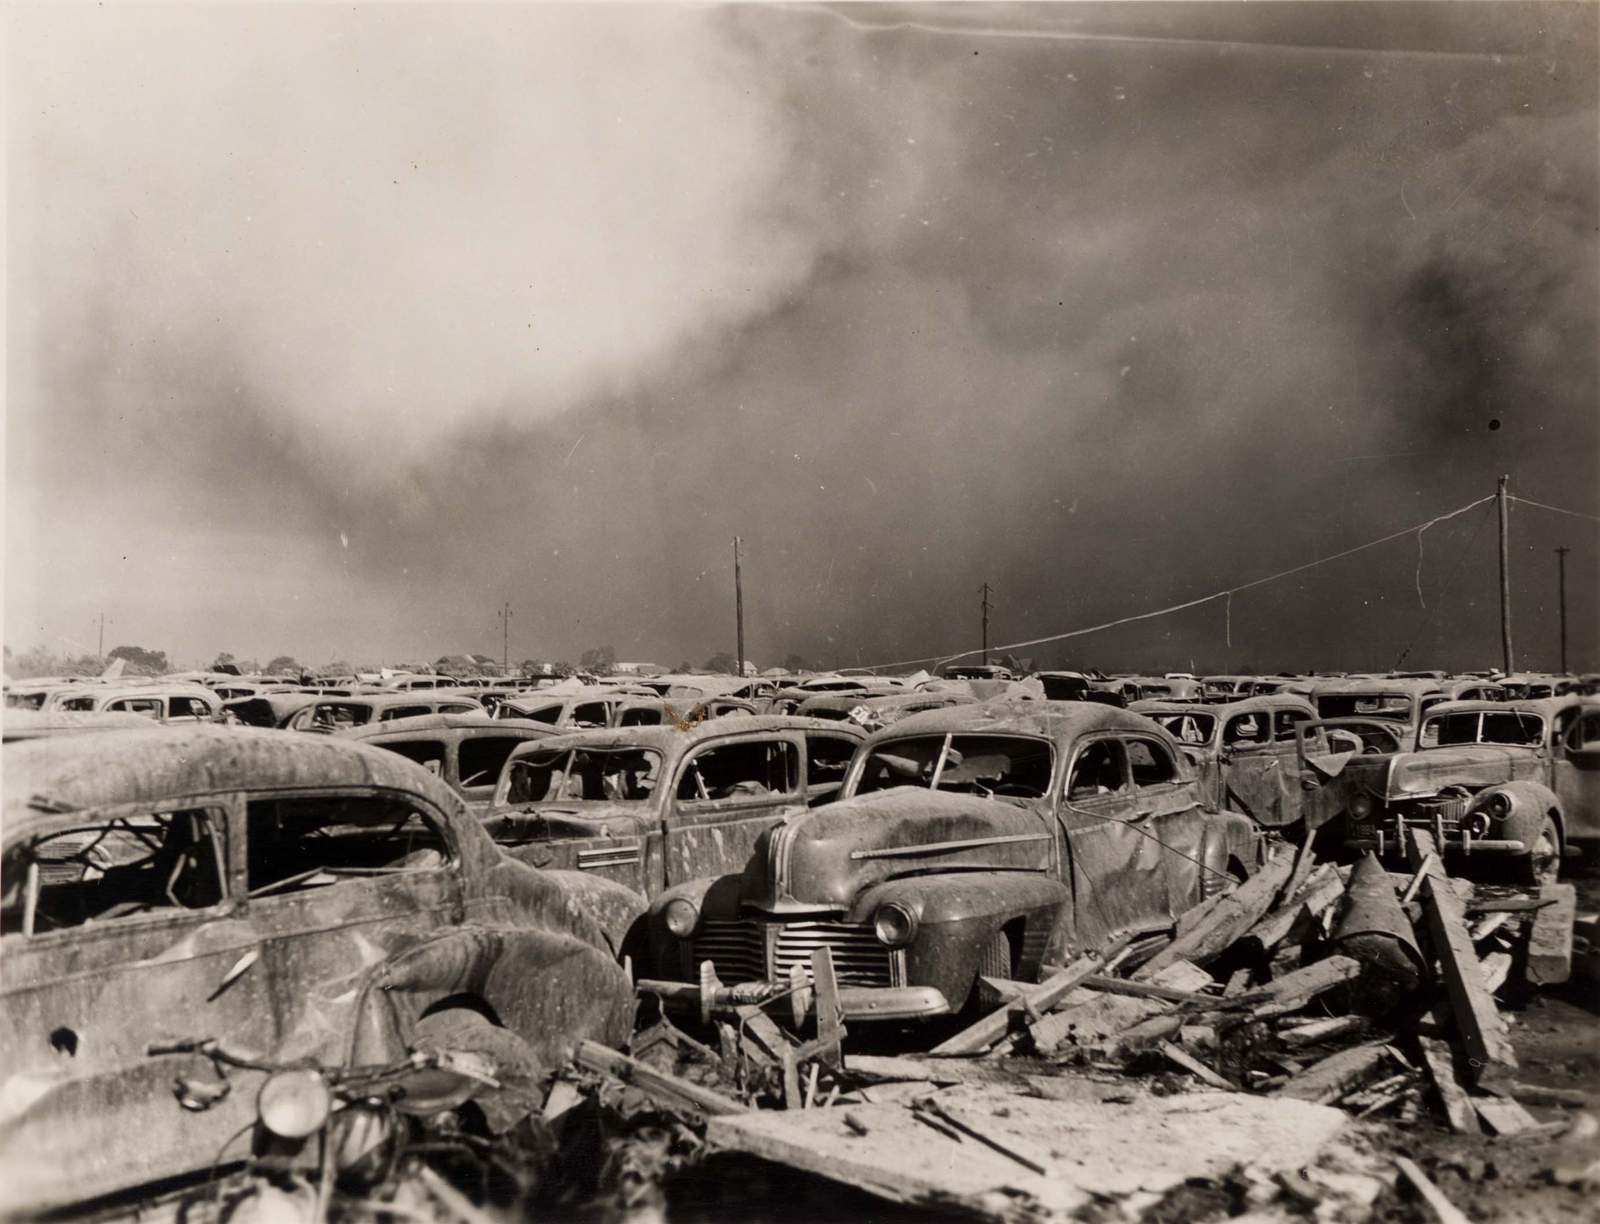 Beirut explosion: A similar event happened in Texas in 1947